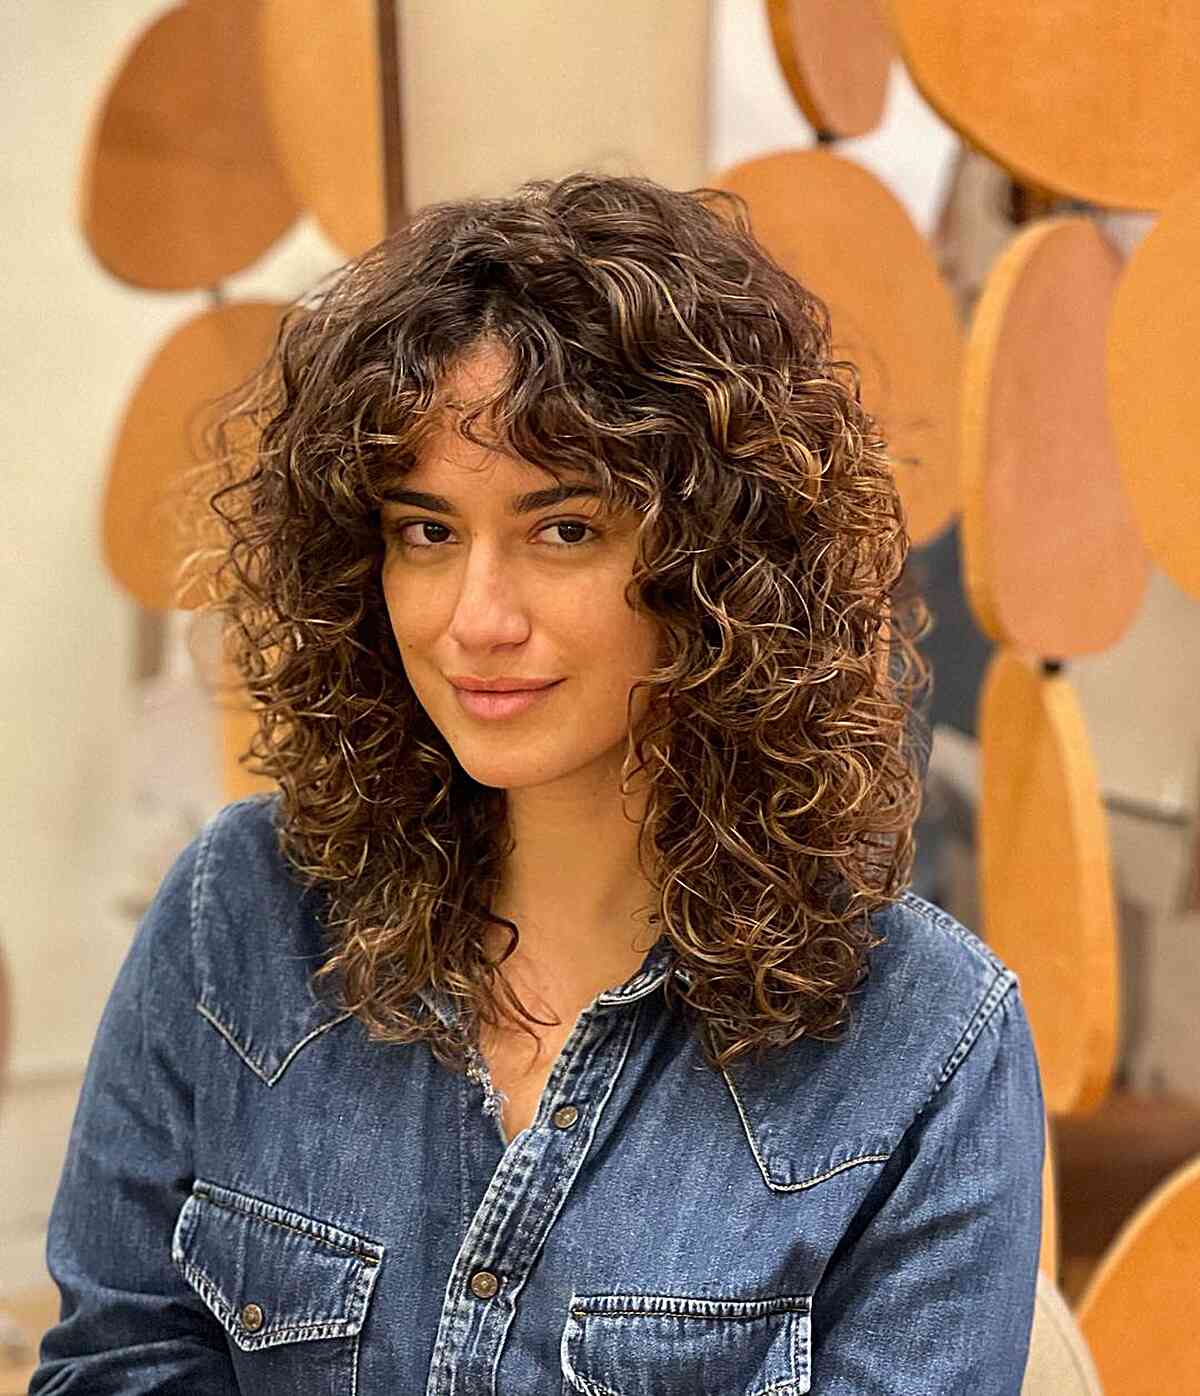 A woman with a medium-length Cadō cut featuring natural curls and face-framing curtain bangs, ideal for wavy to curly hair textures.